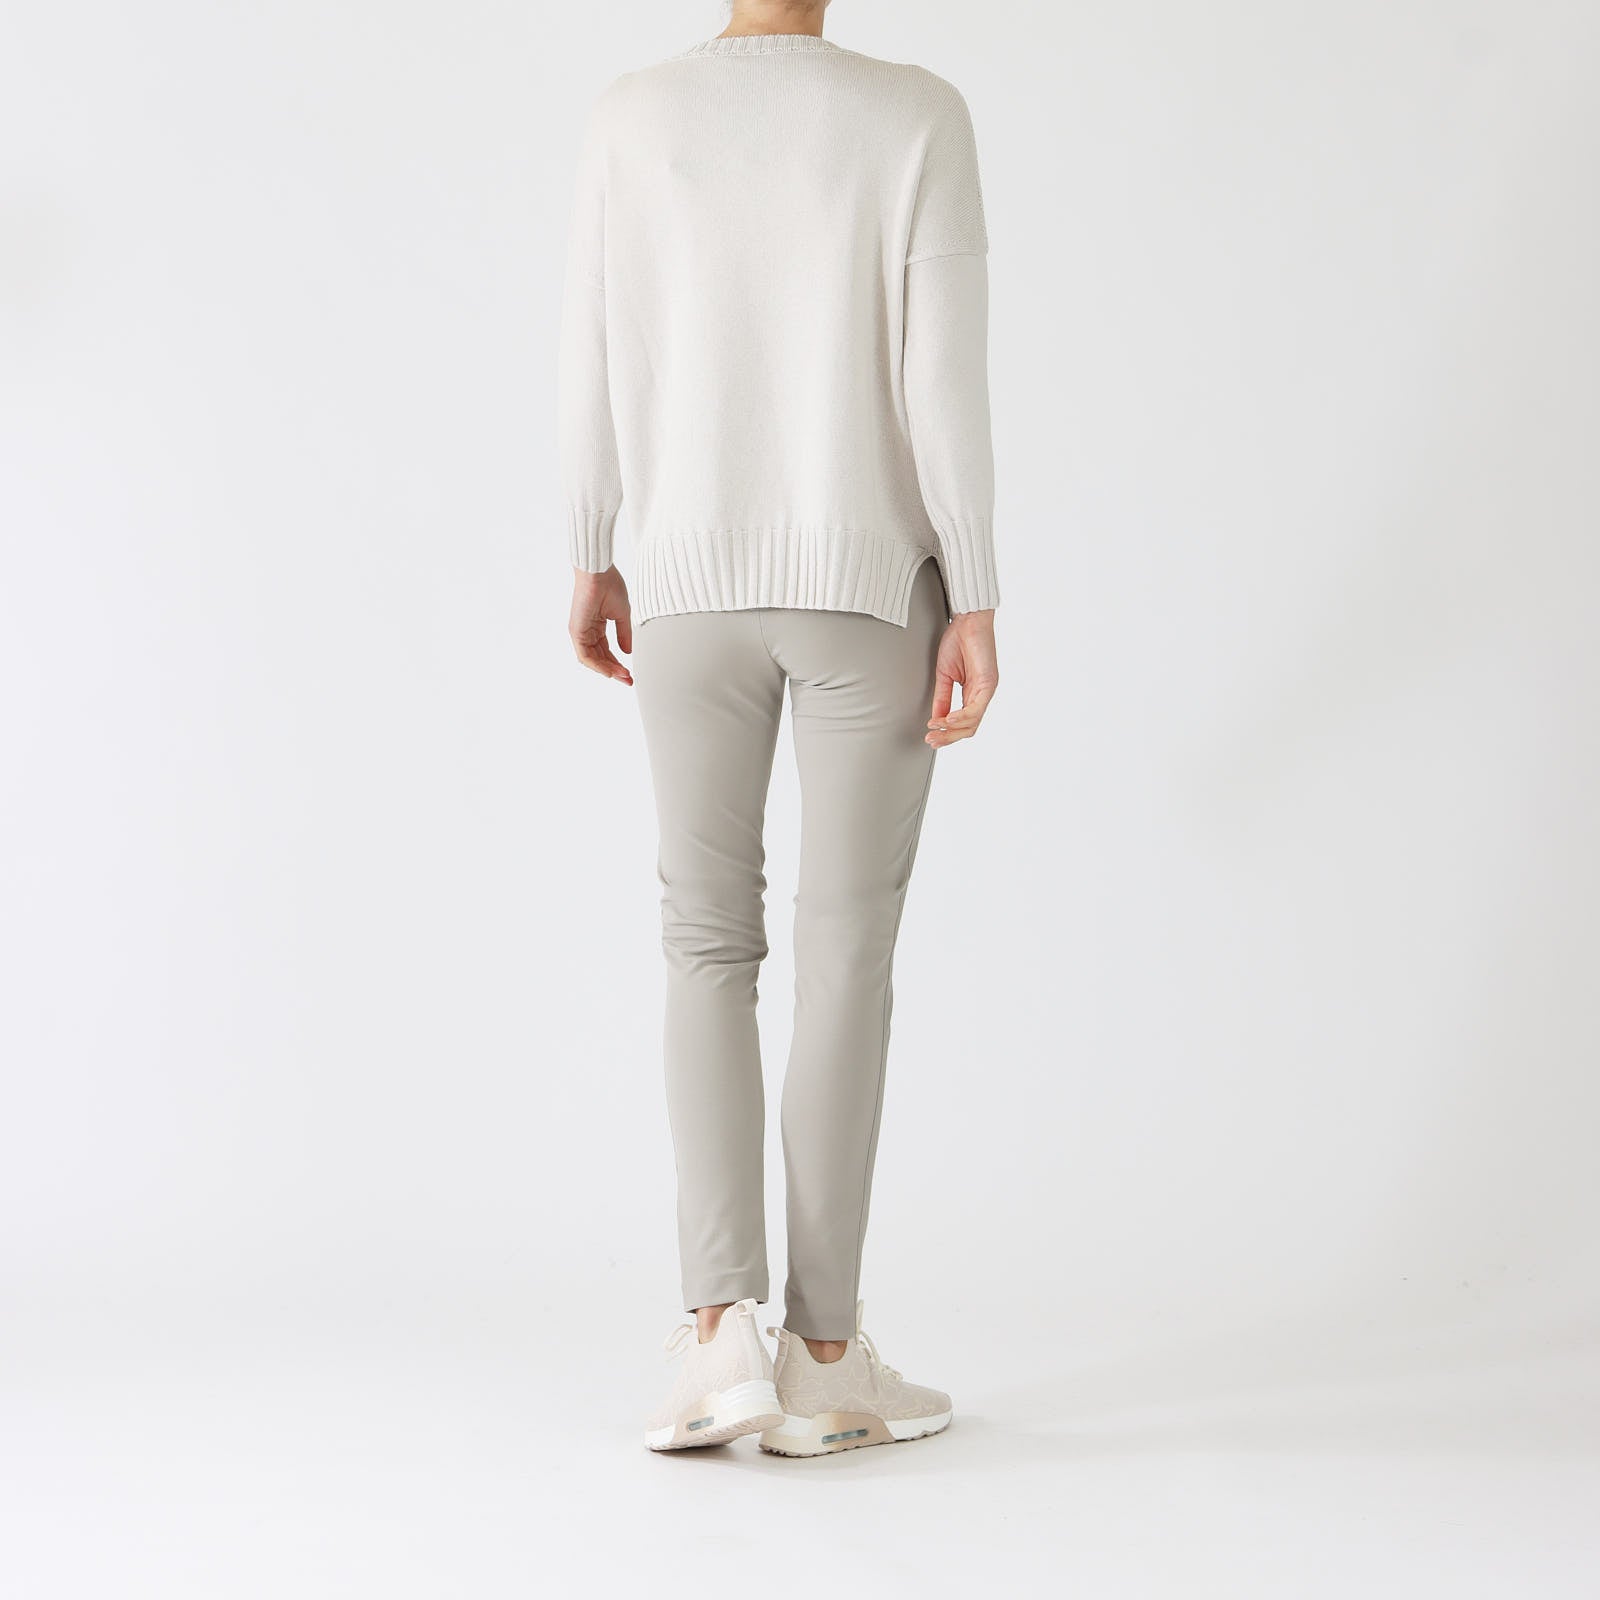 Calce Cable Knit Cashmere Blend Sweater